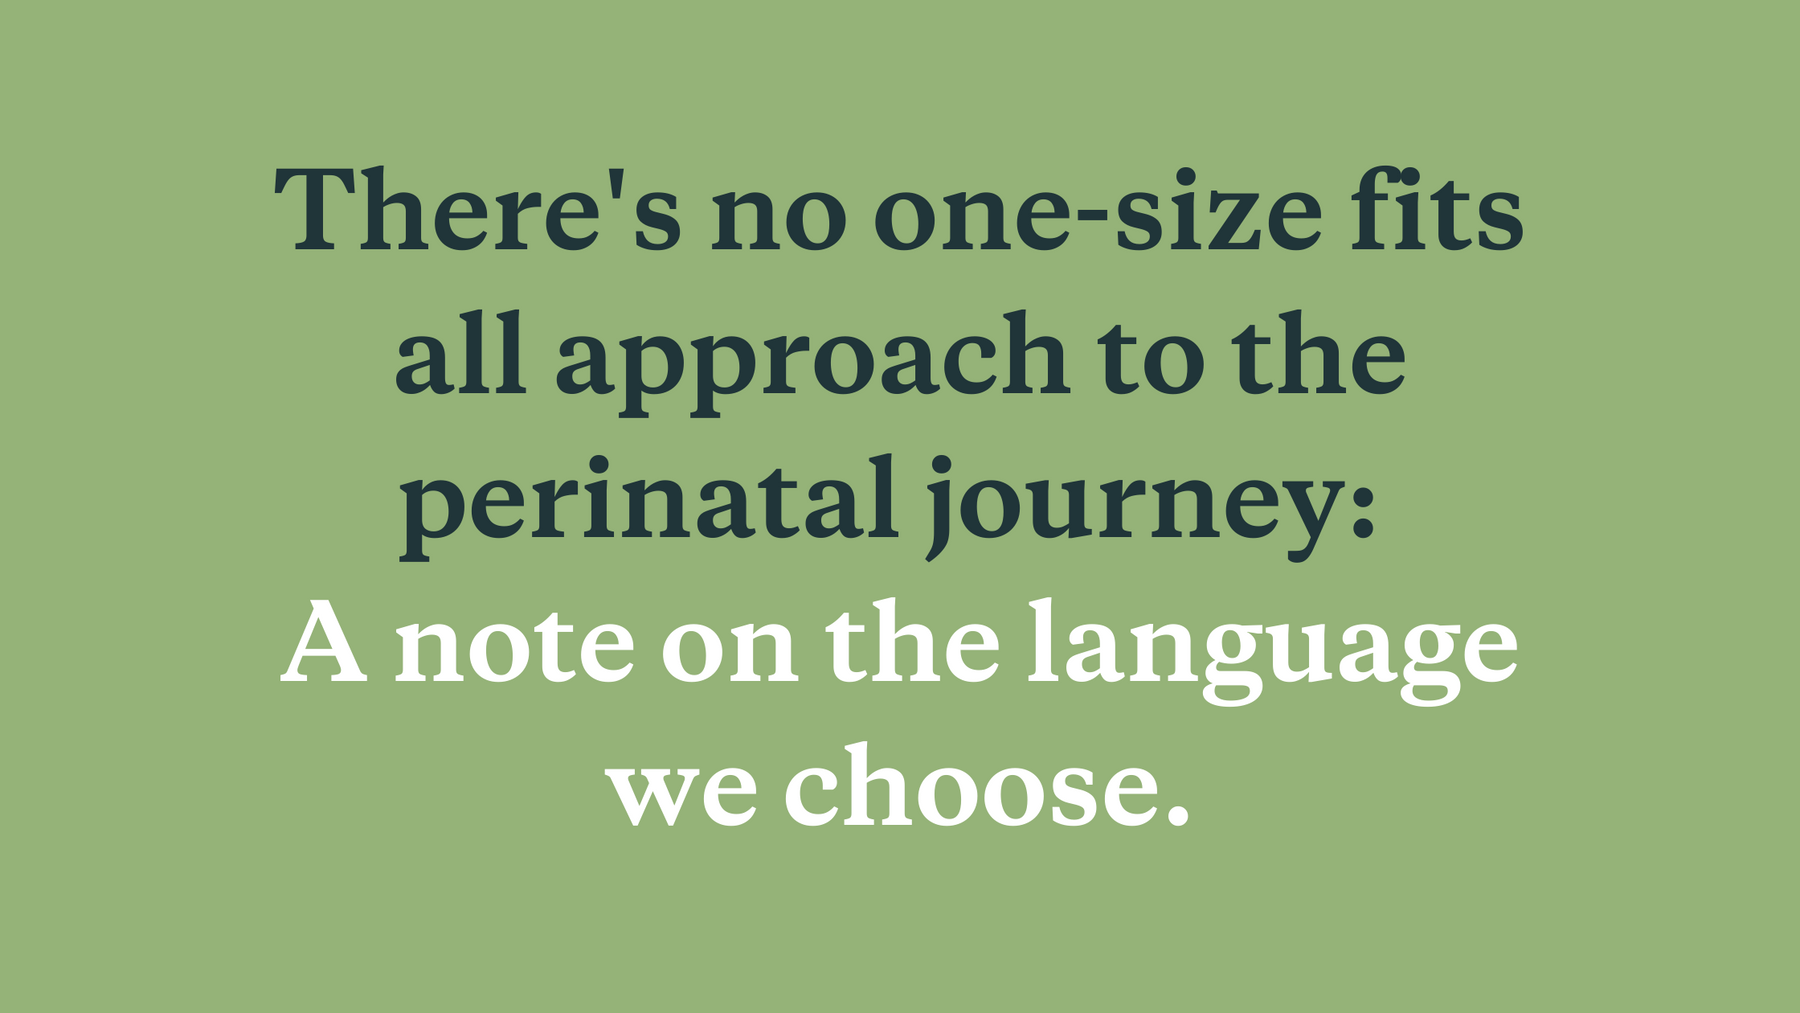 There's no one-size fits all approach to the perinatal journey: a note on the language we choose.